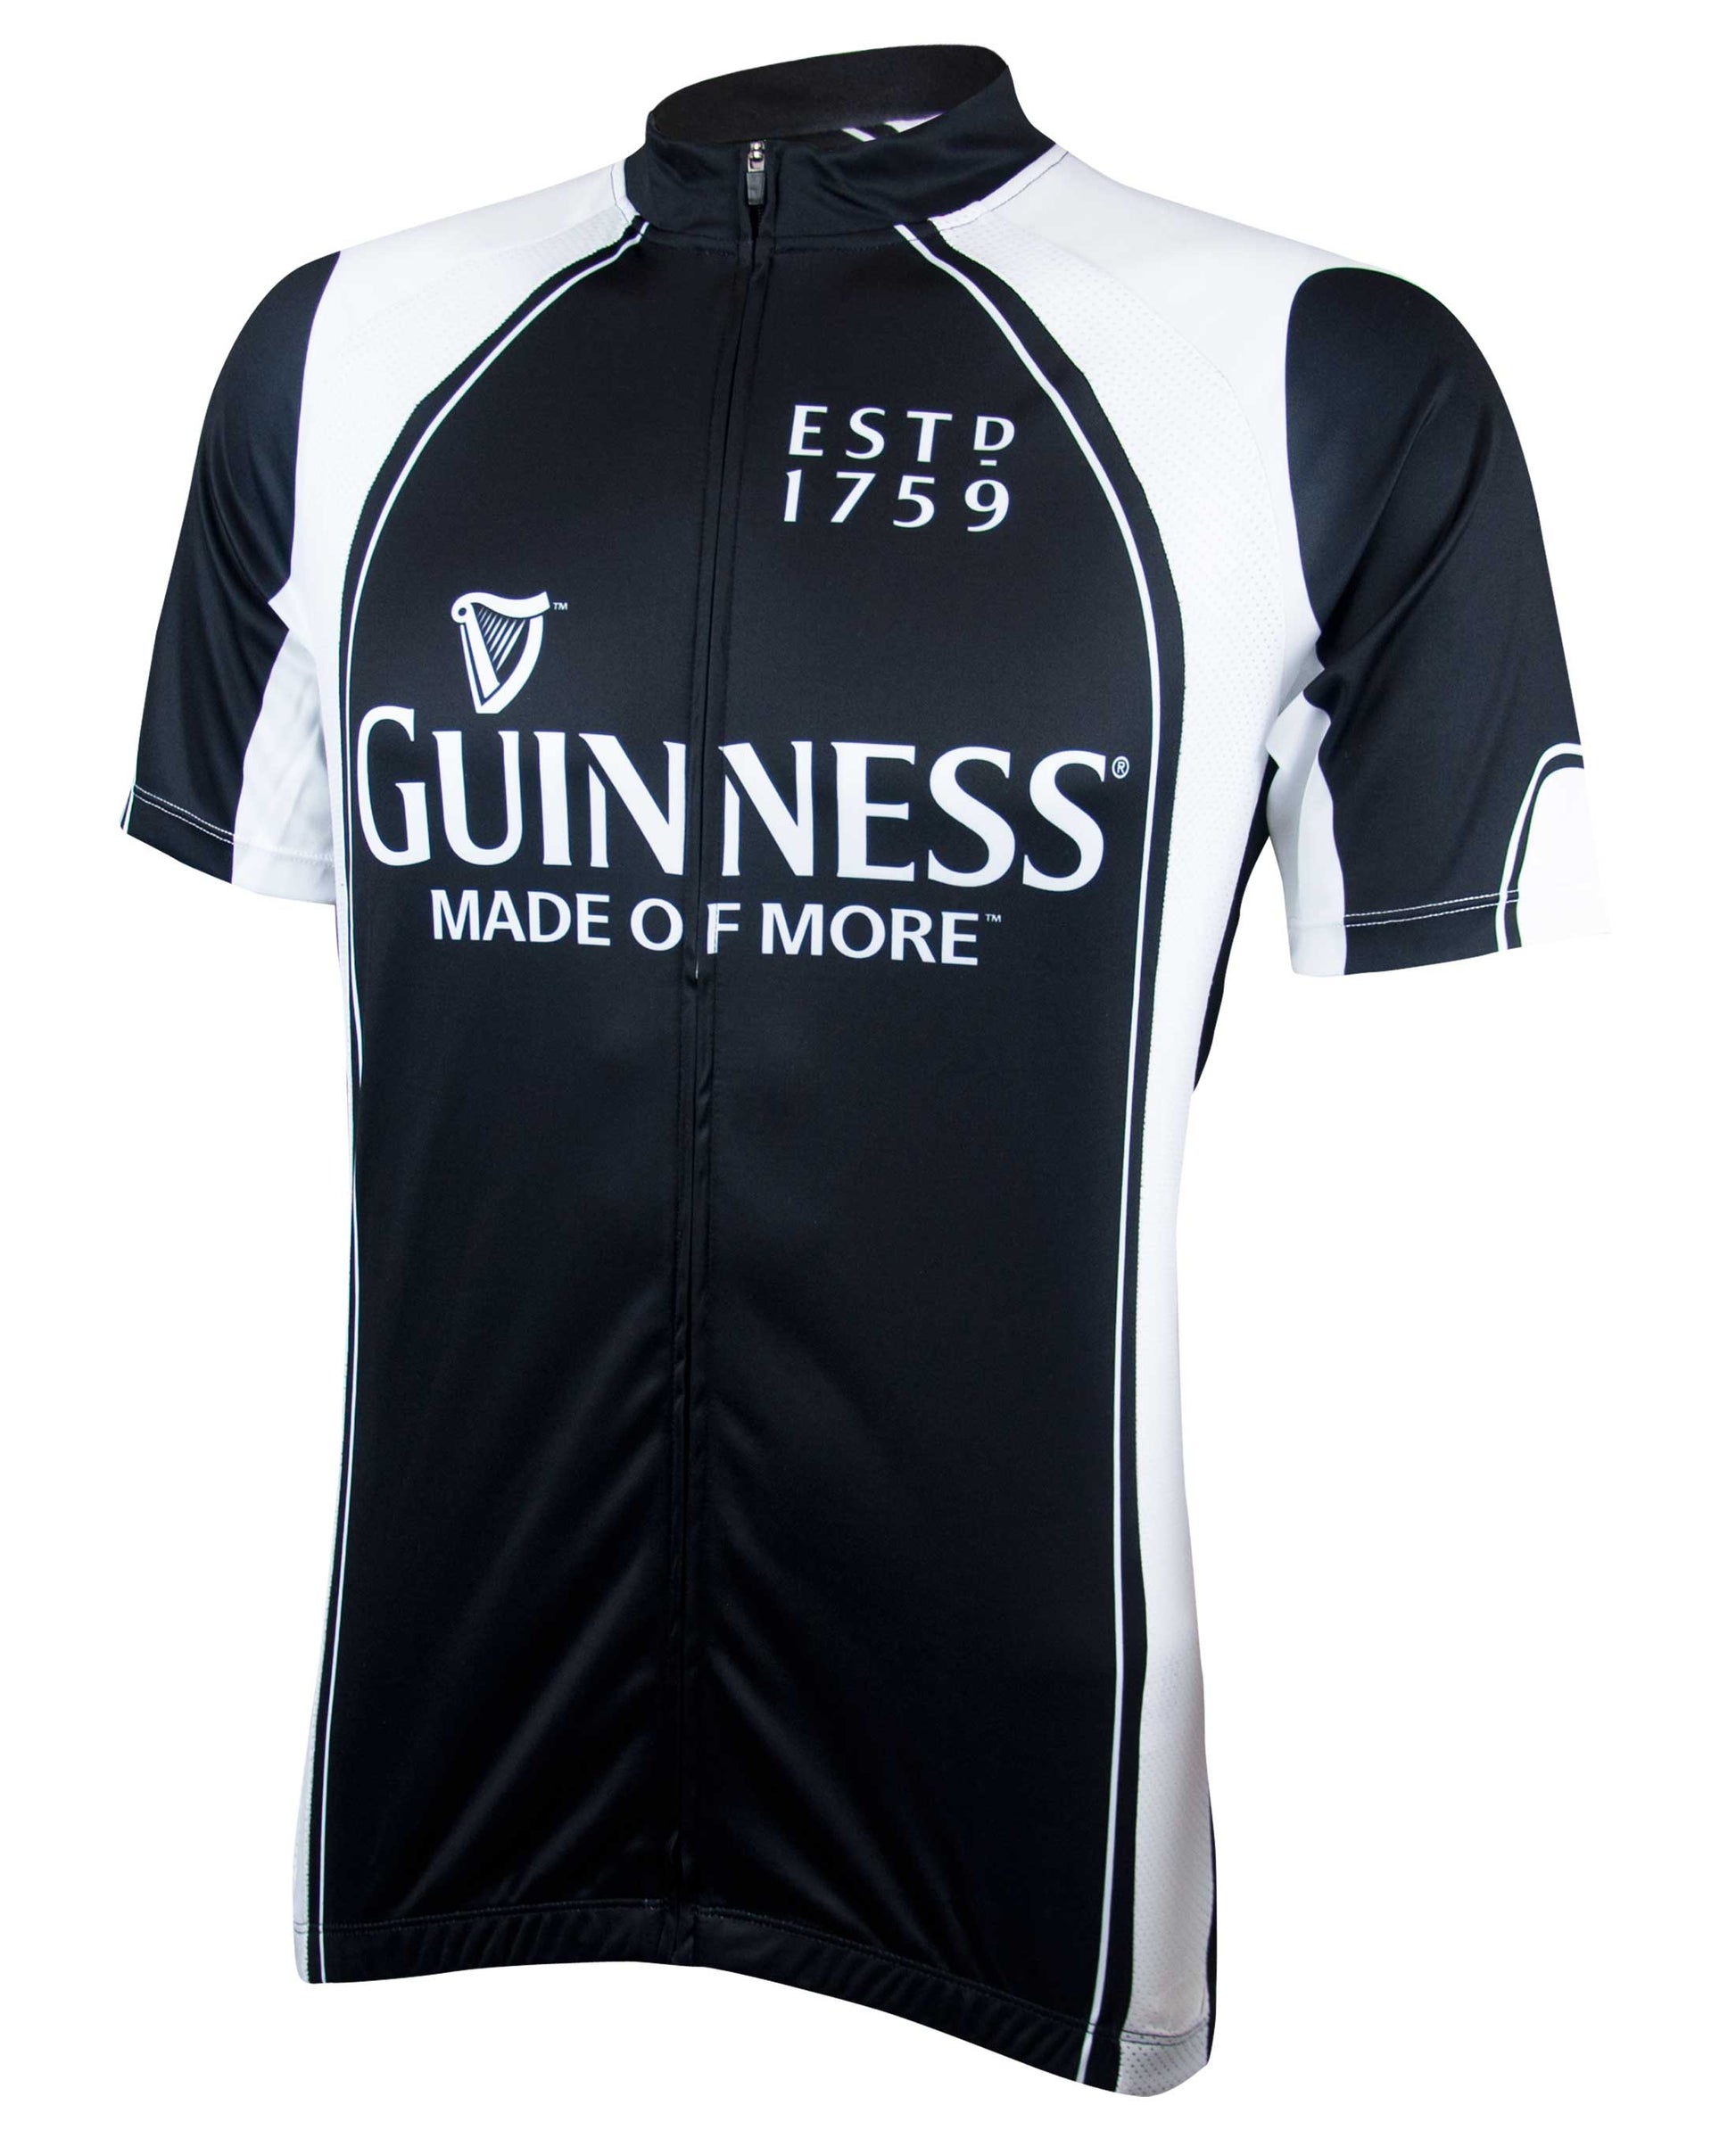 Guinness Cycling Jersey